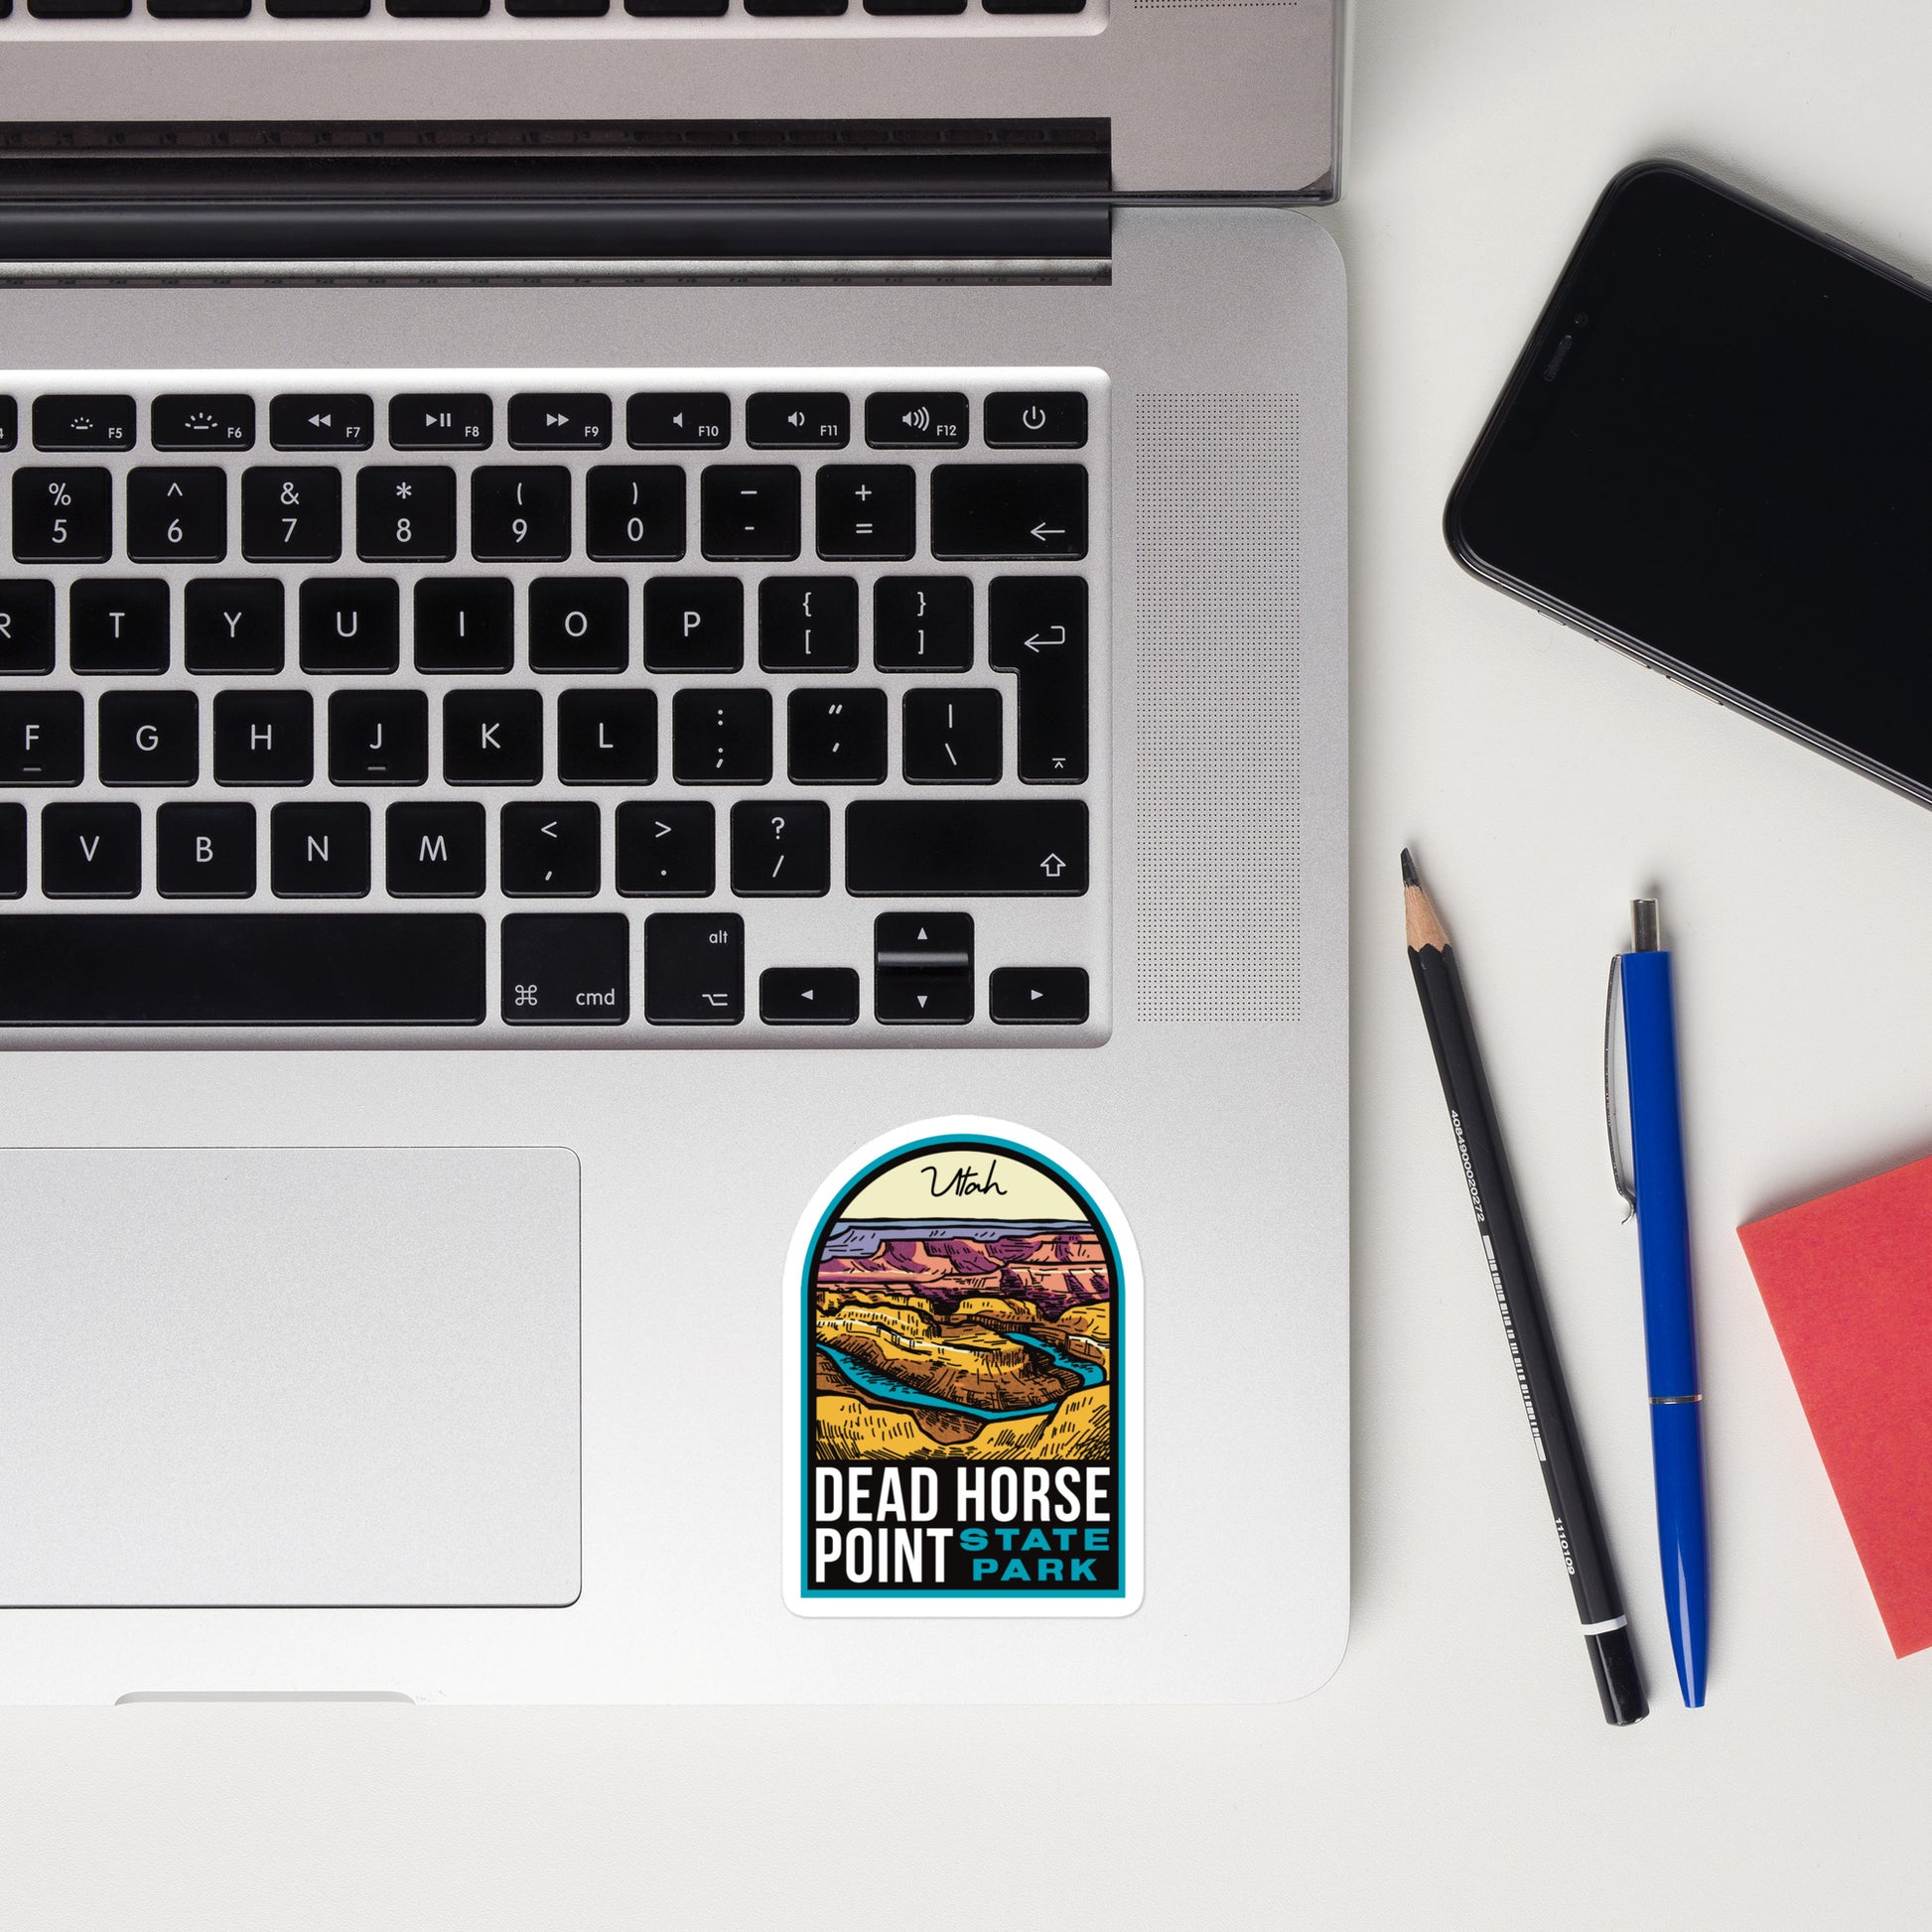 A sticker of Dead Horse Point State Park on a laptop